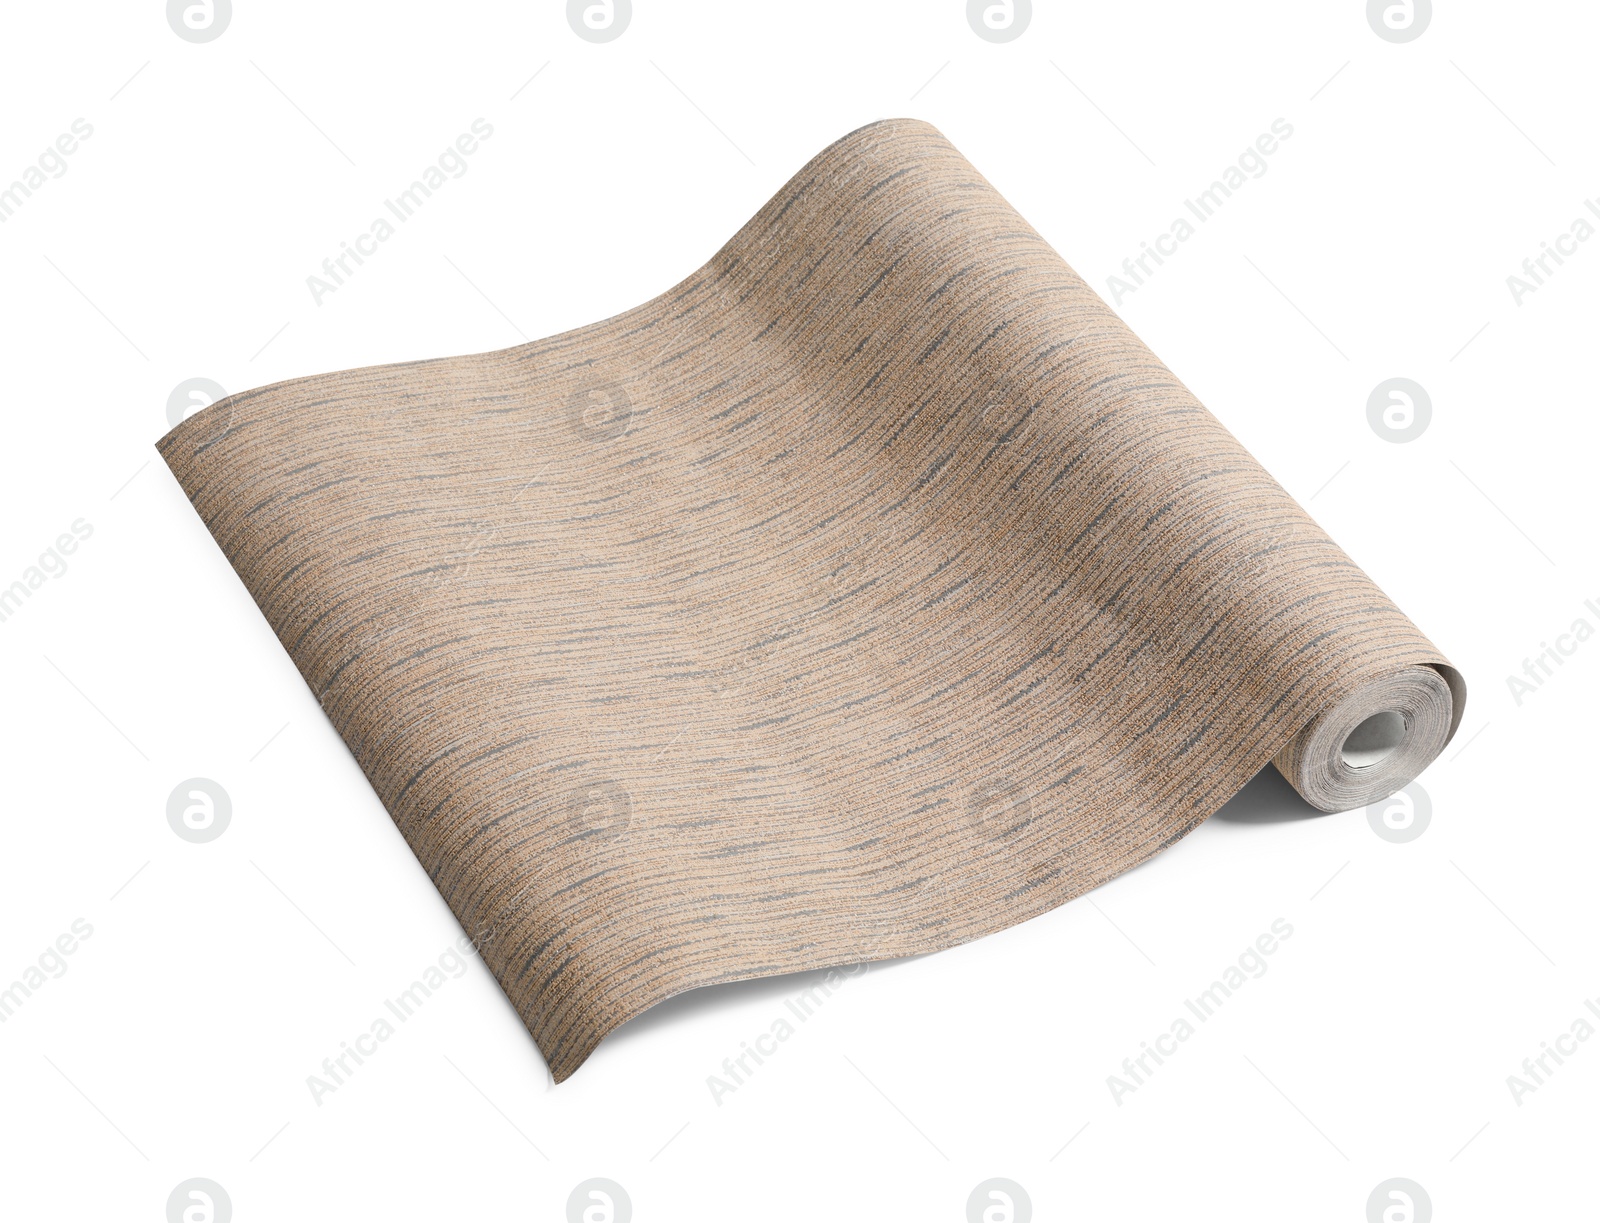 Image of One beige color wallpaper roll isolated on white